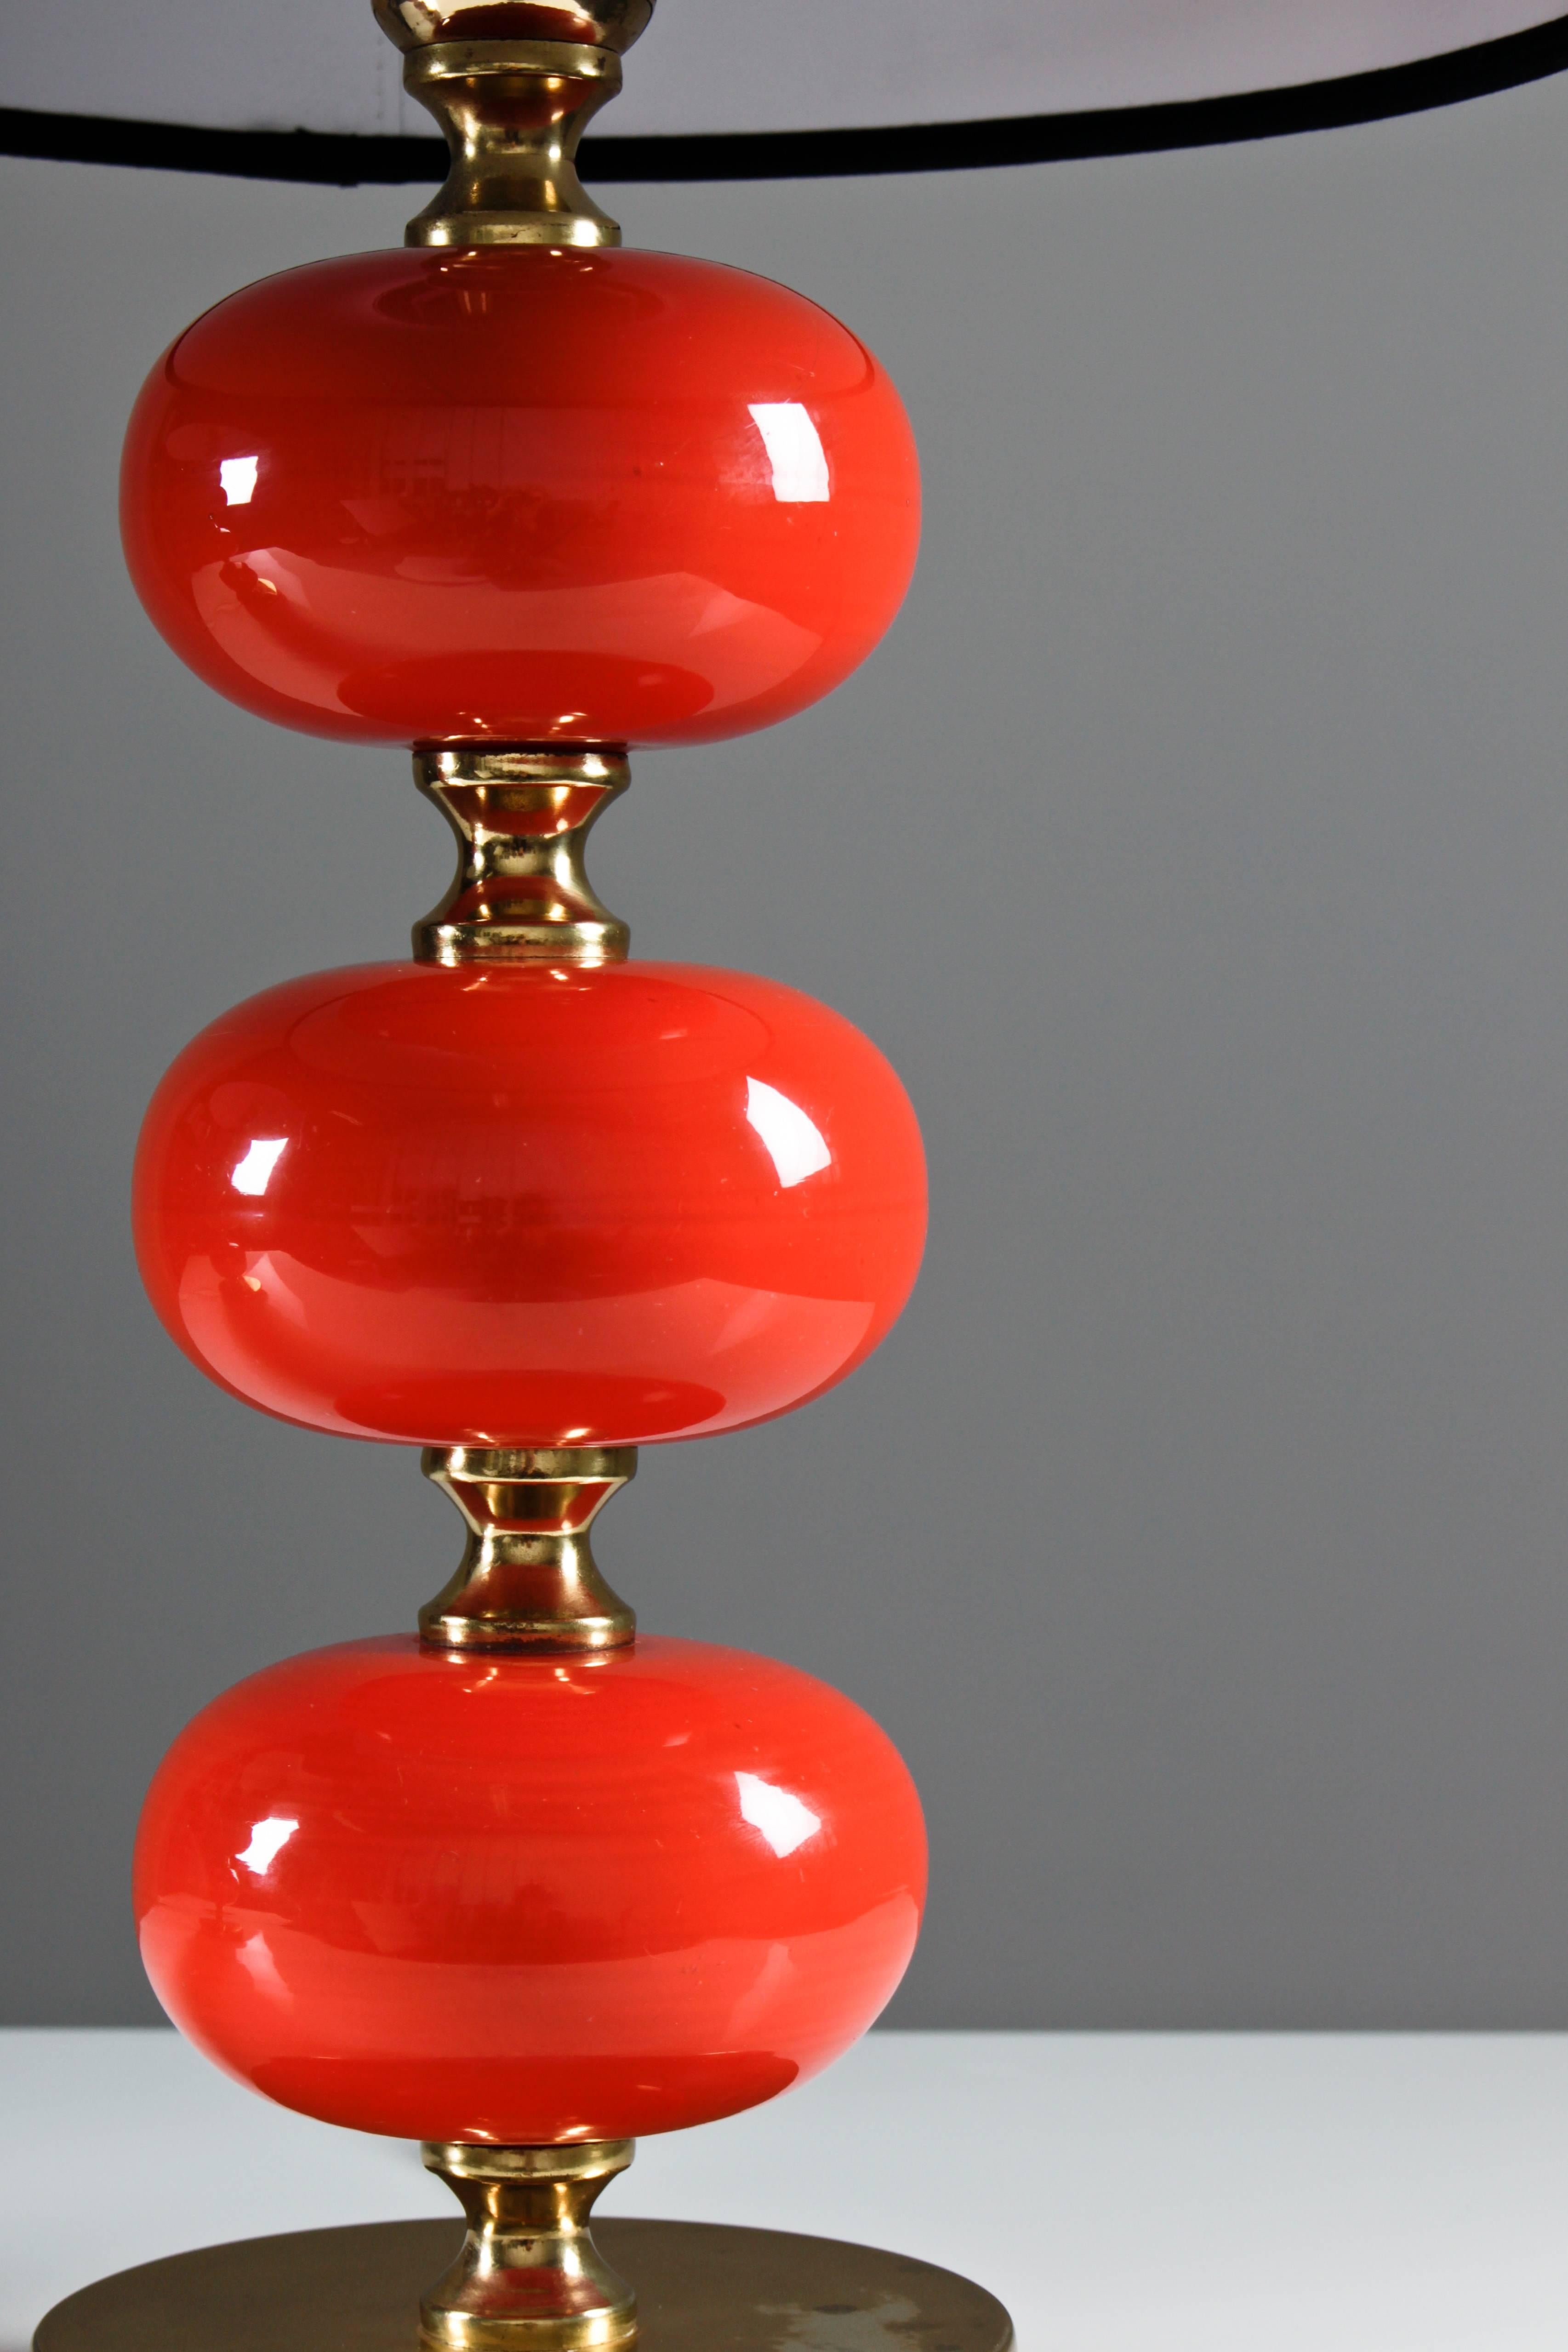 This set of two midcentury table lamps was manufactured between the 1960s and 1970s by Stilarmatur Trana°s in Sweden. The lamps feature three orange glass spheres with brass feet and details. The lamps have been rewired.
The lamps are in good